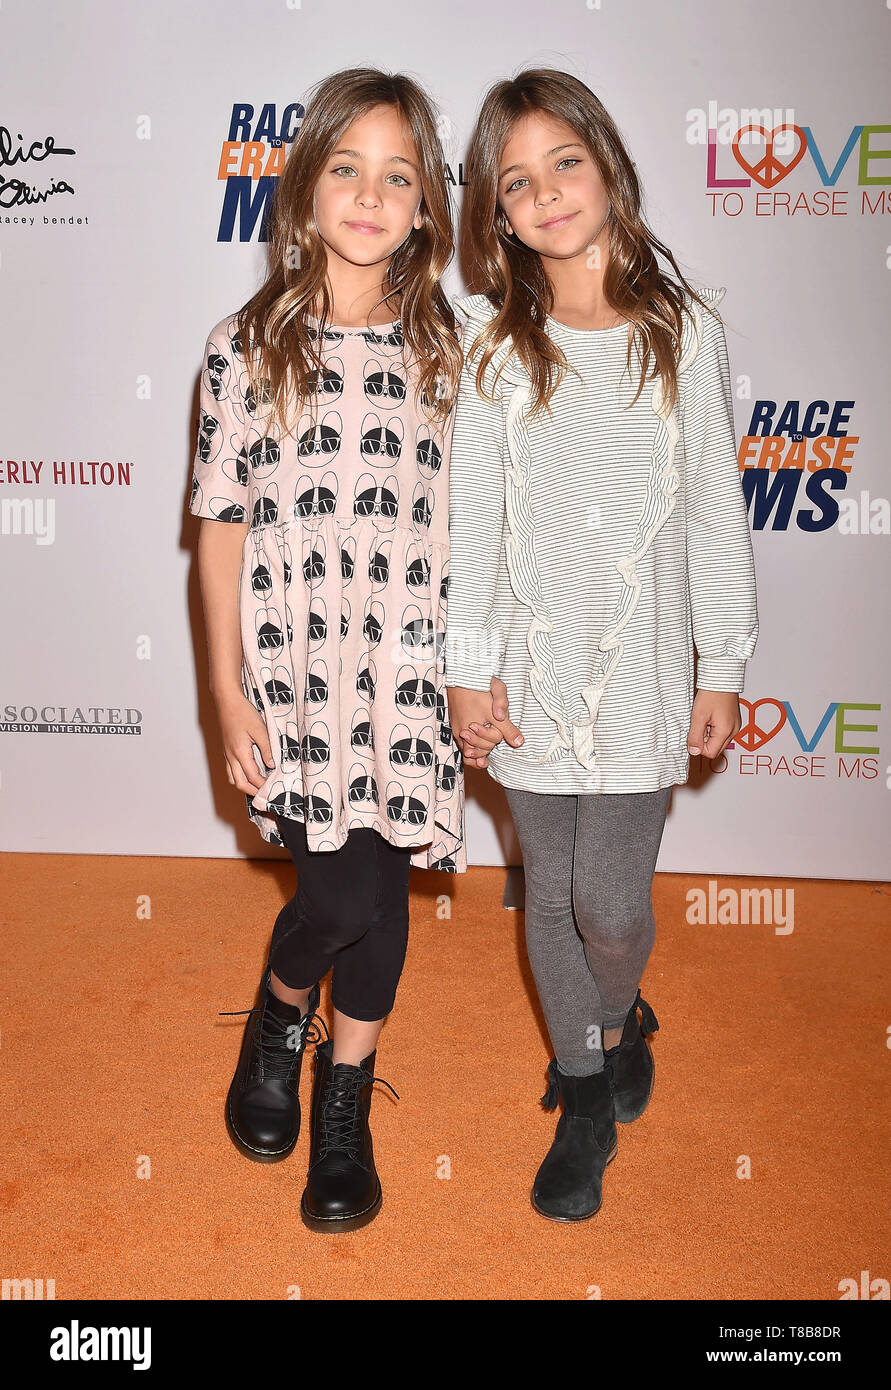 BEVERLY HILLS, CA - MAY 10: Ava Marie Clements (L) and Leah Rose Clements attend the 26th Annual Race to Erase MS Gala at The Beverly Hilton Hotel on May 10, 2019 in Beverly Hills, California. Stock Photo